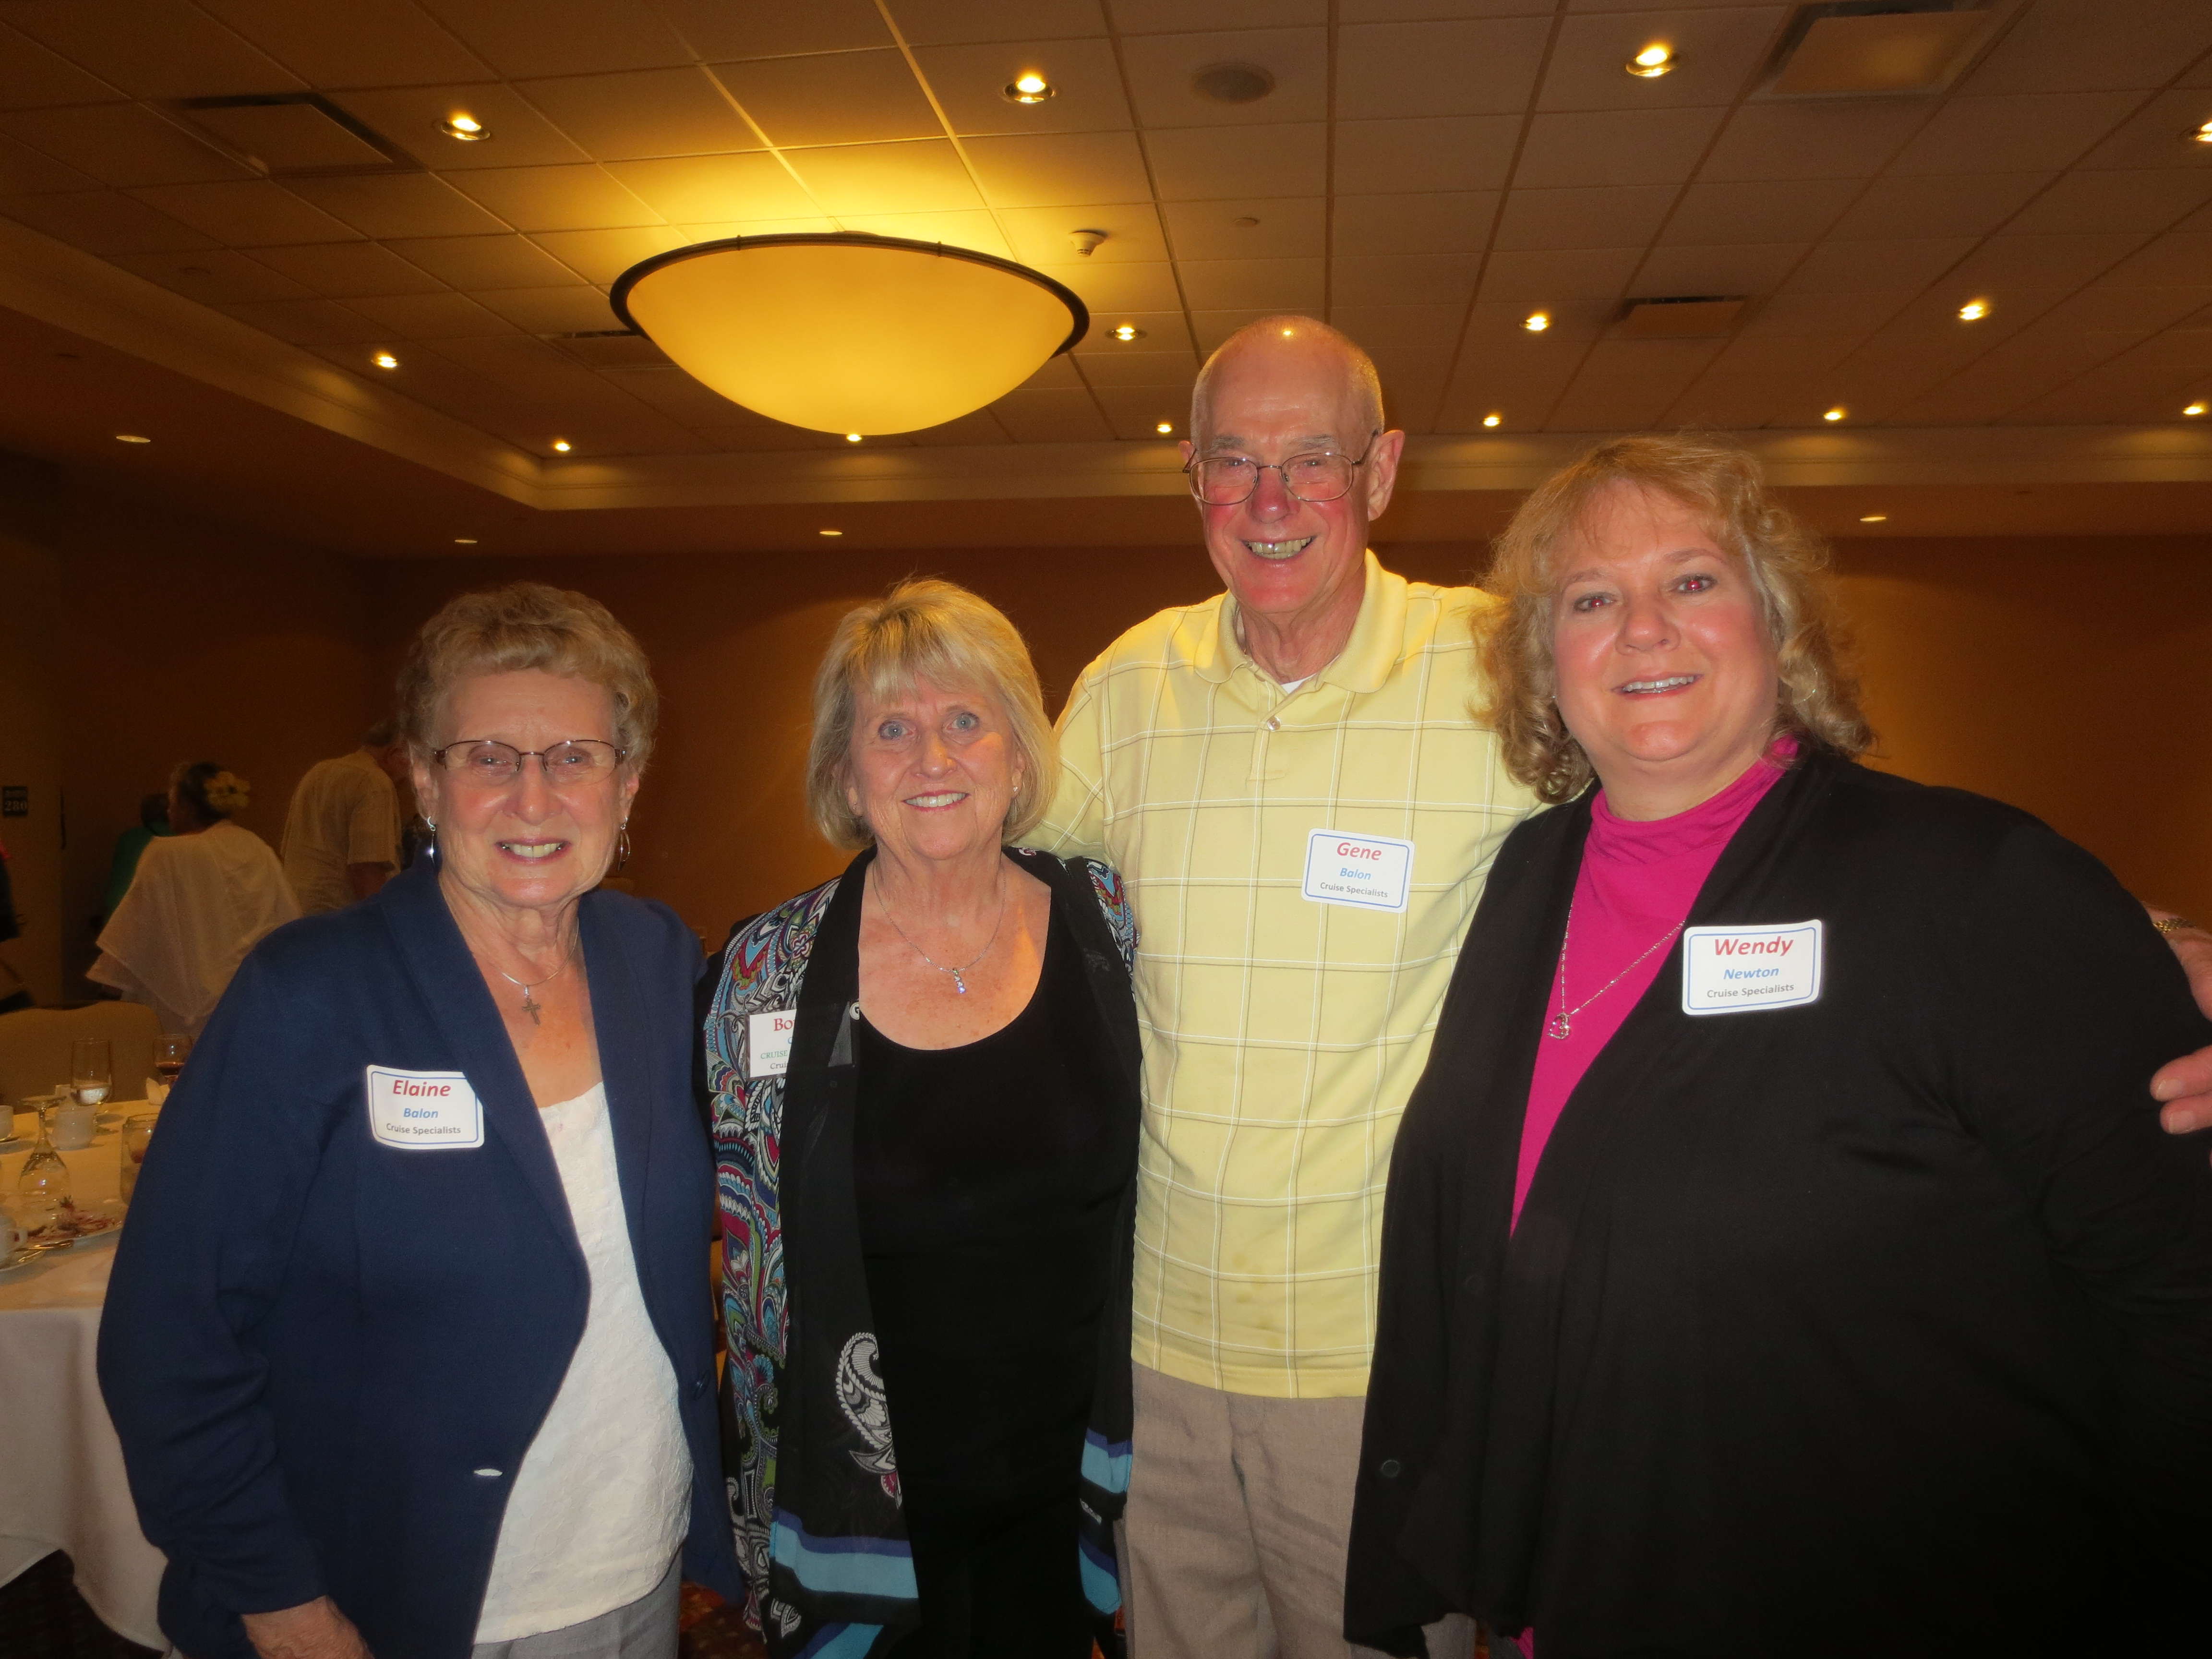 Guests Elaine, Gene and Wendy with Cruise Specialists' Bonnie C.